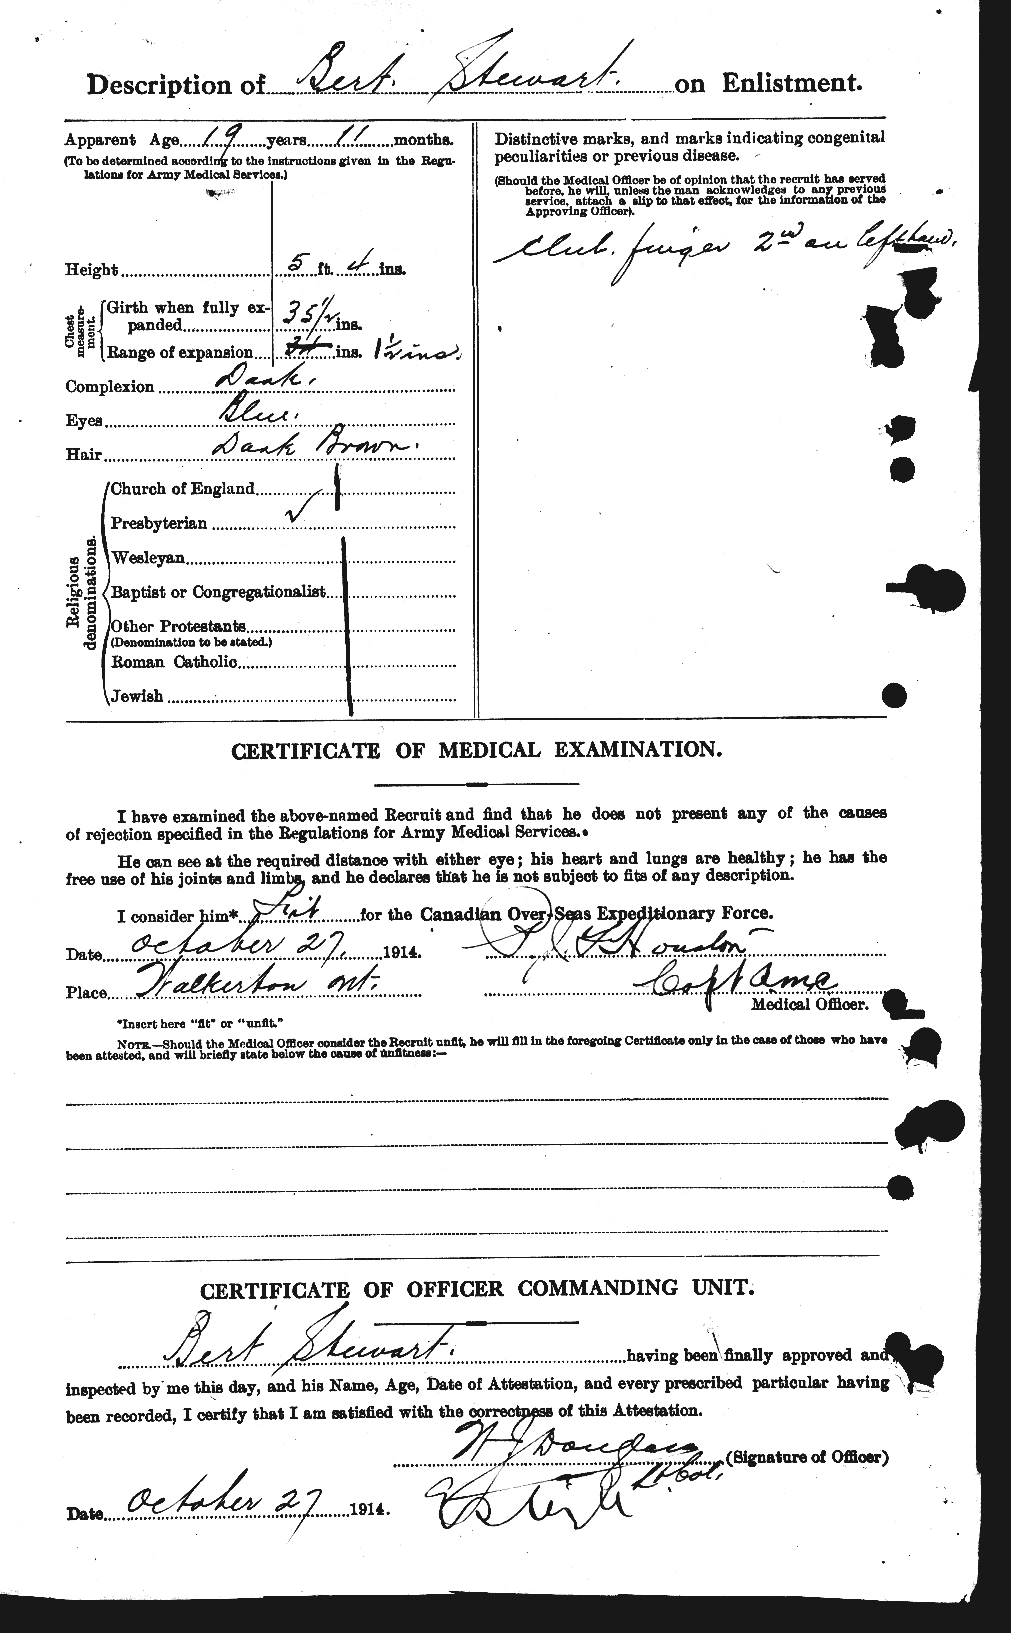 Personnel Records of the First World War - CEF 118239b